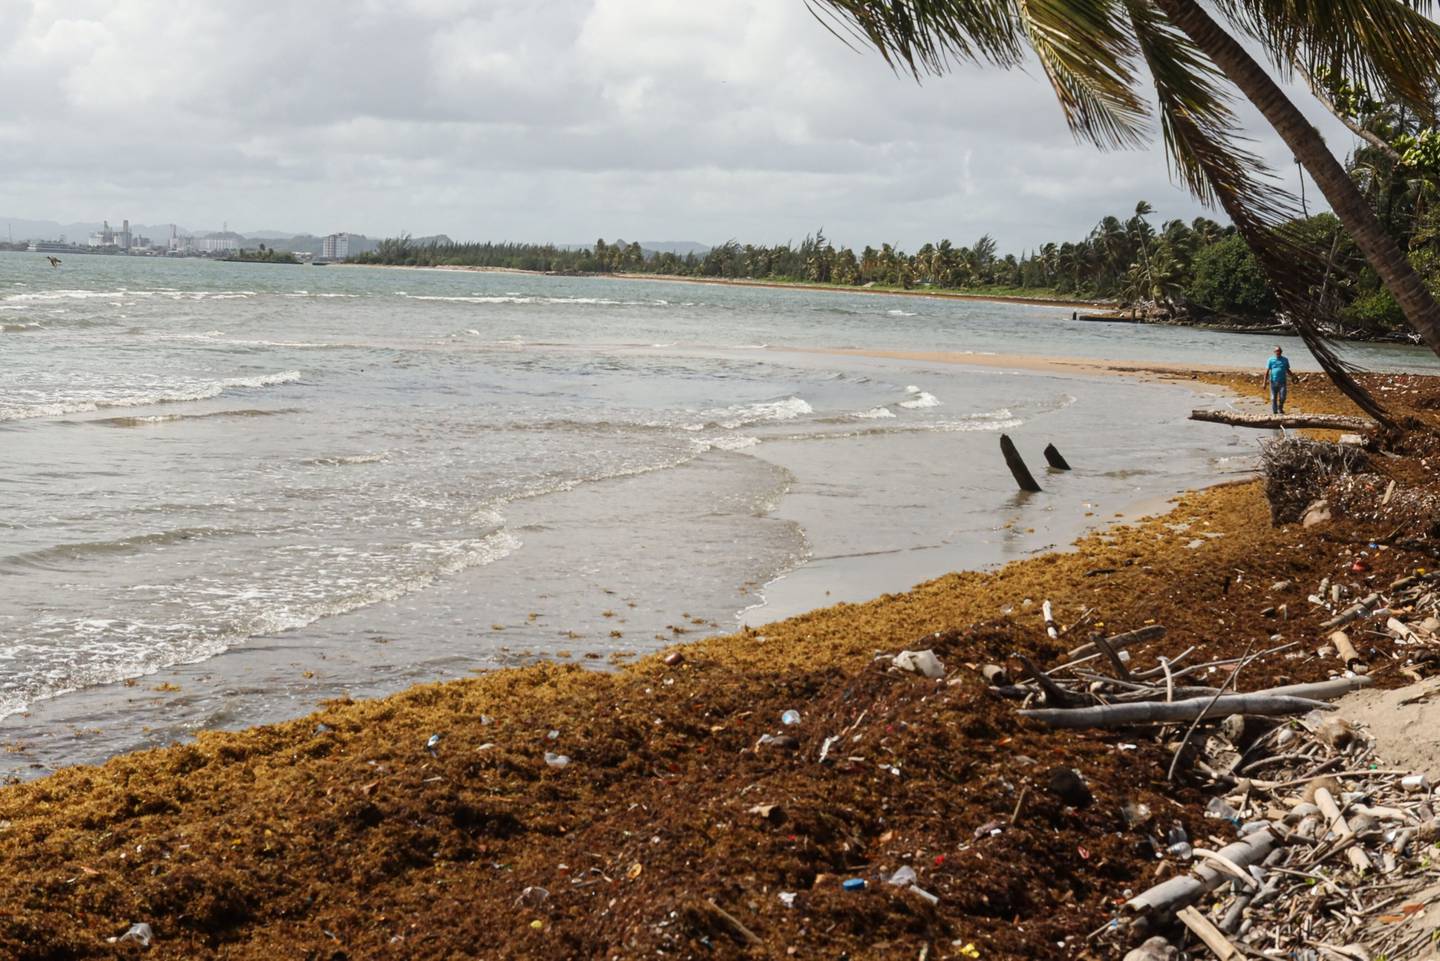 Sargassum season usually runs from March until October, but major landfalls this year began in January, particularly in Mexico, Florida and parts of the Caribbean.